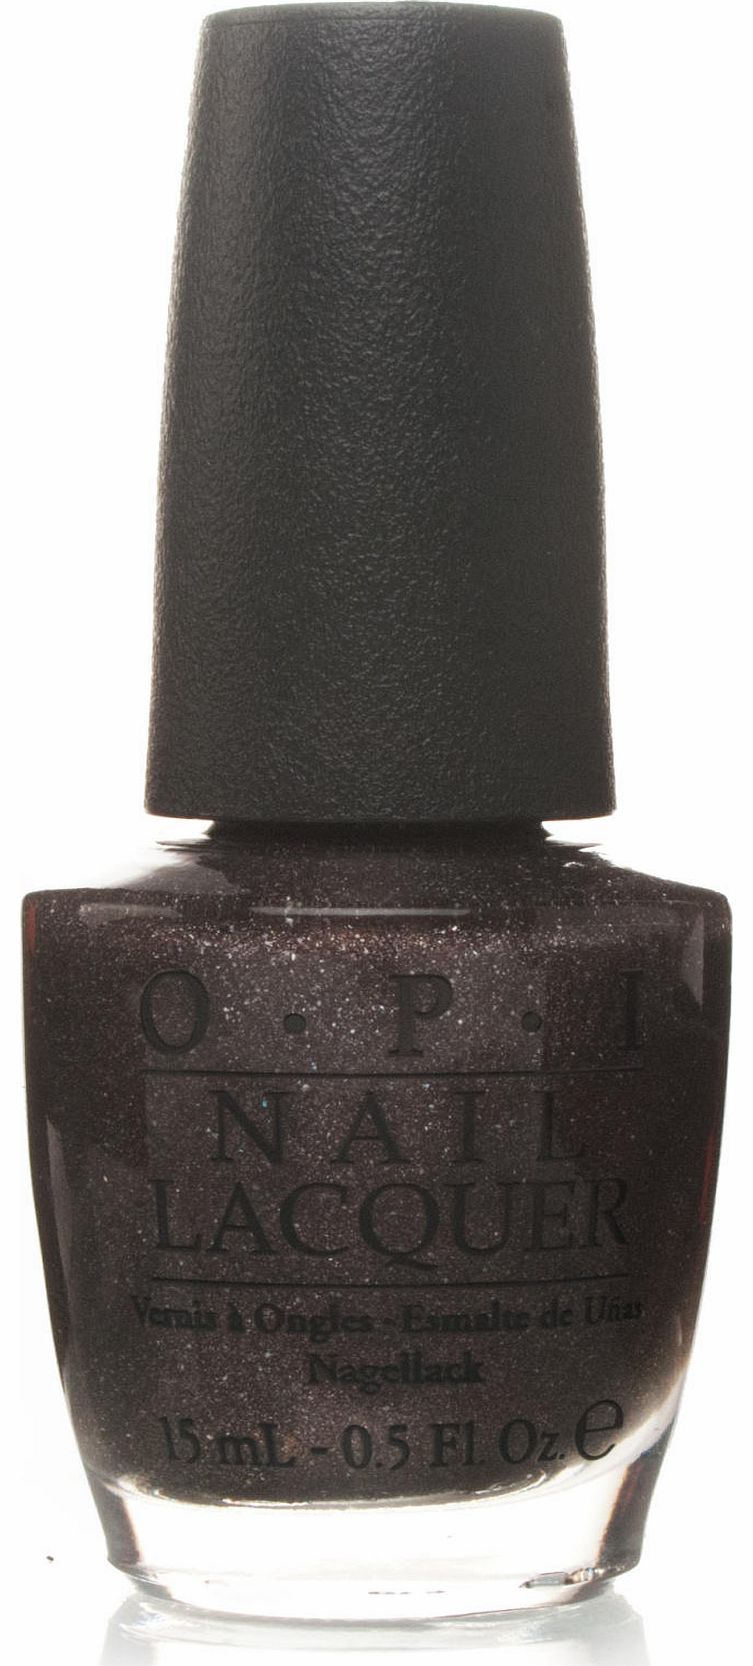 OPI My Private Jet Nail Lacquer